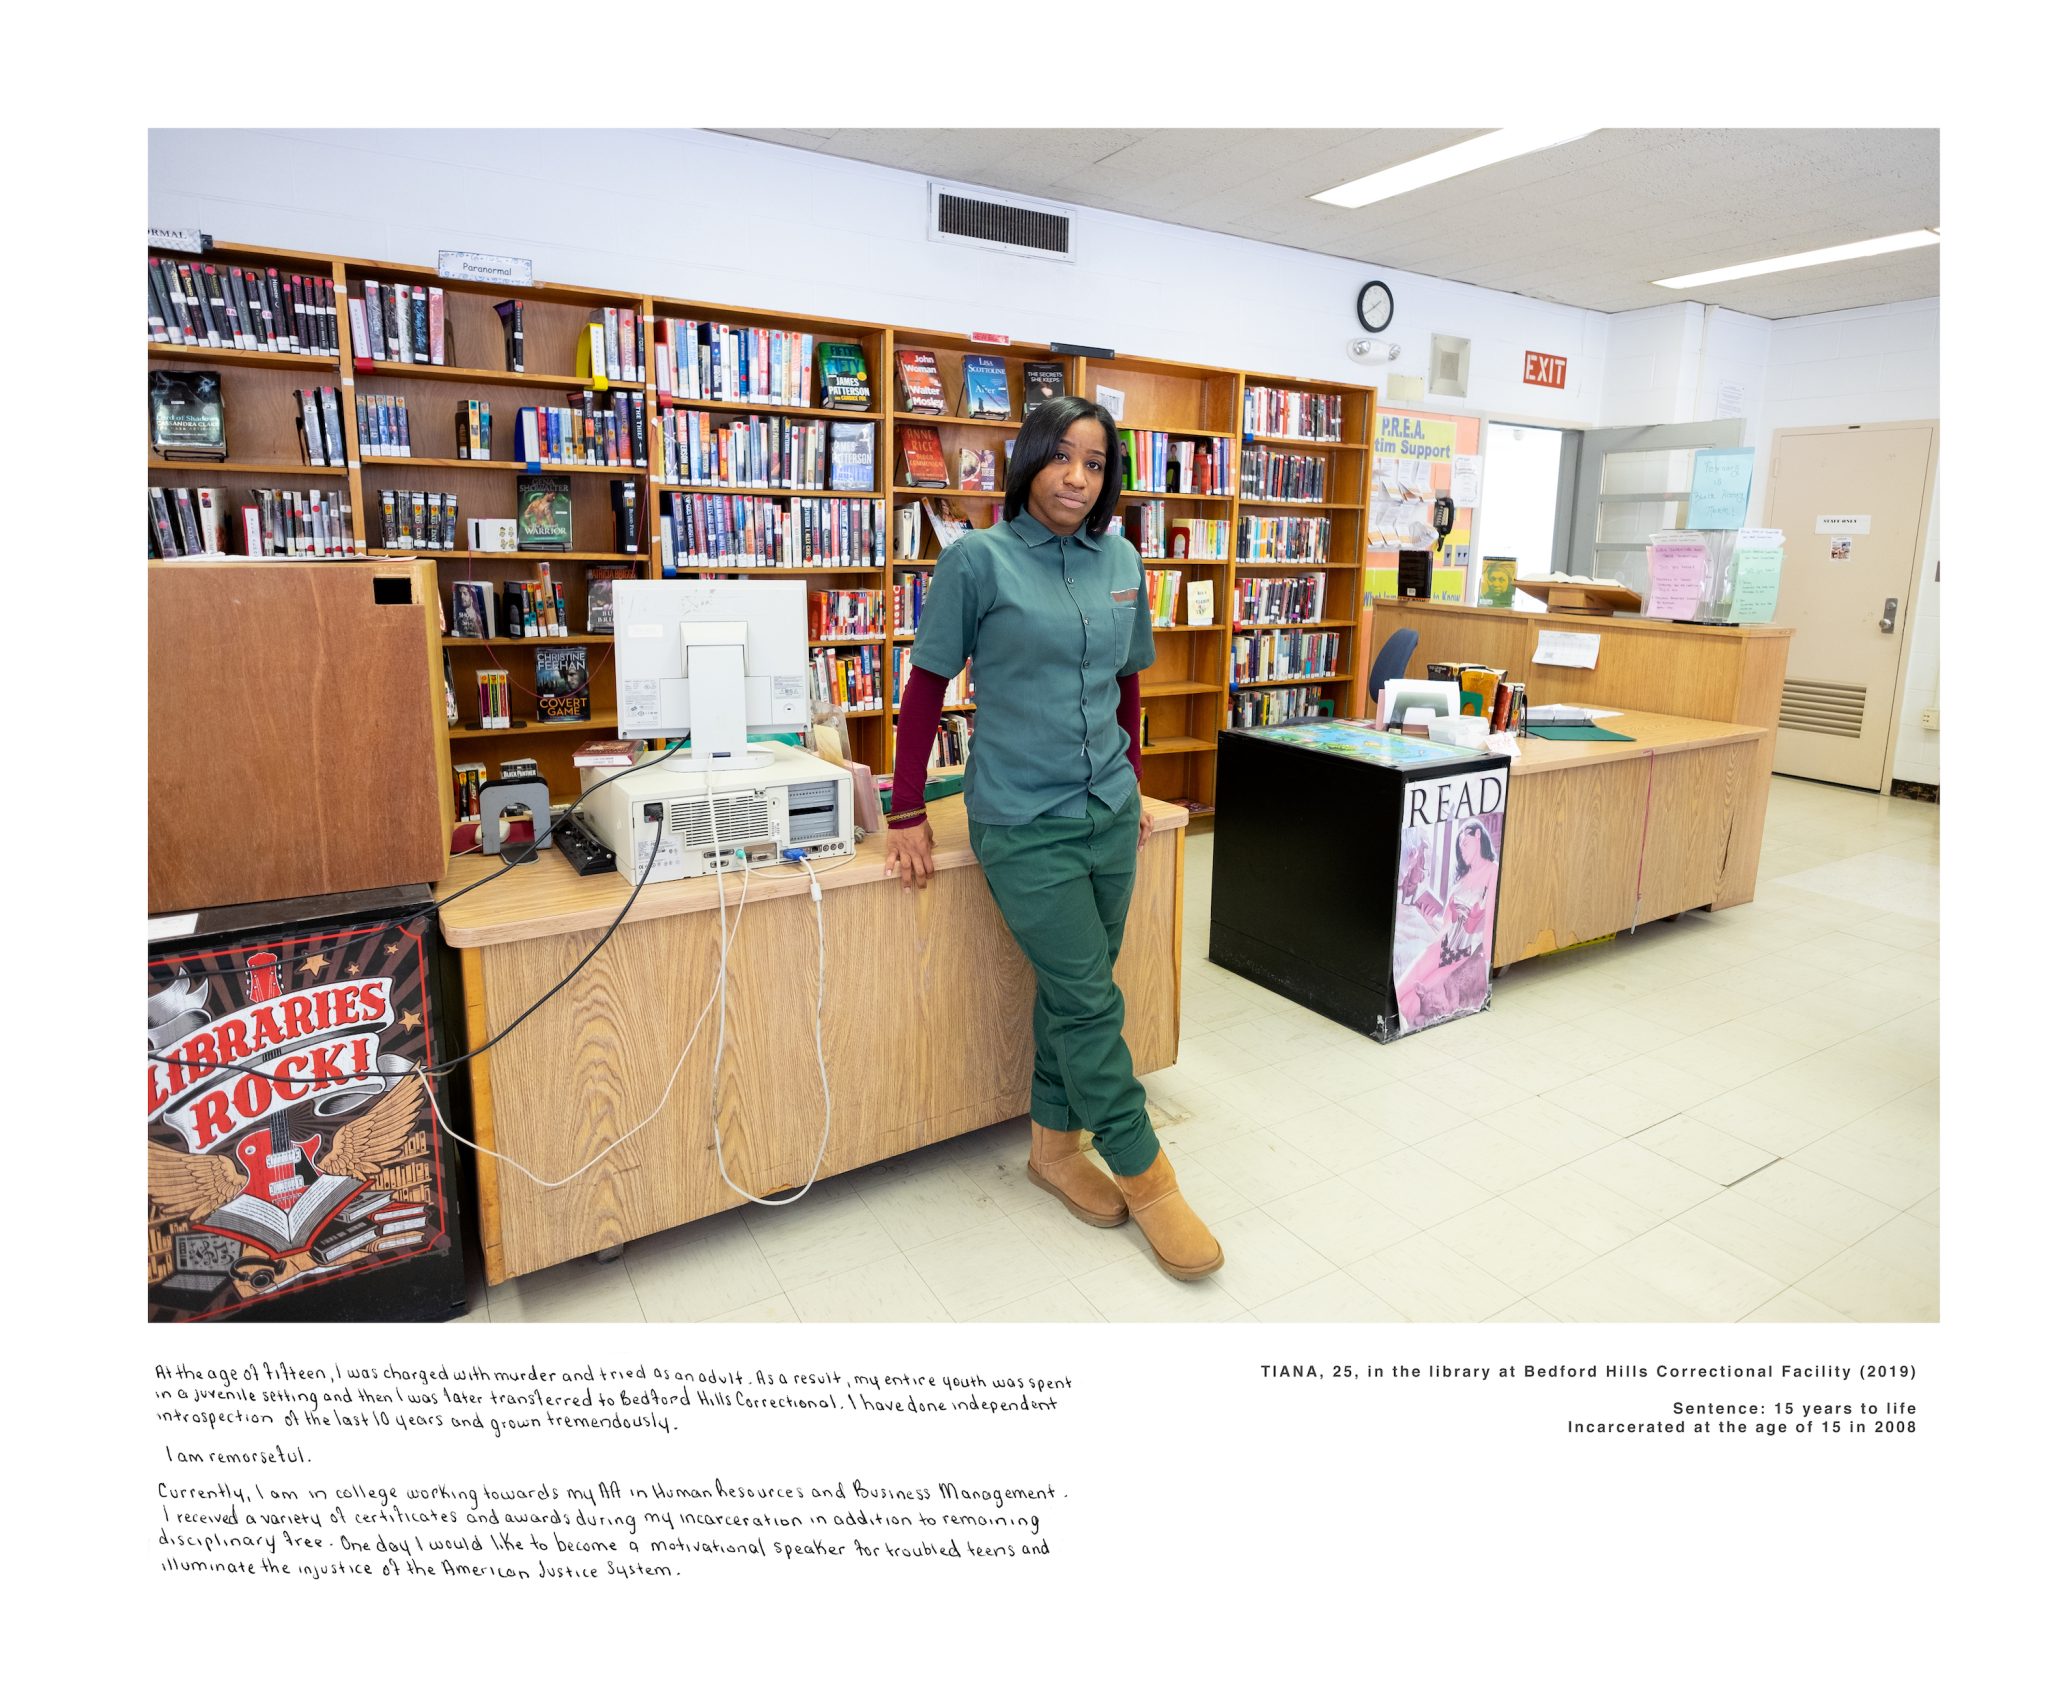 A Black woman standing in the library of a correctional facility